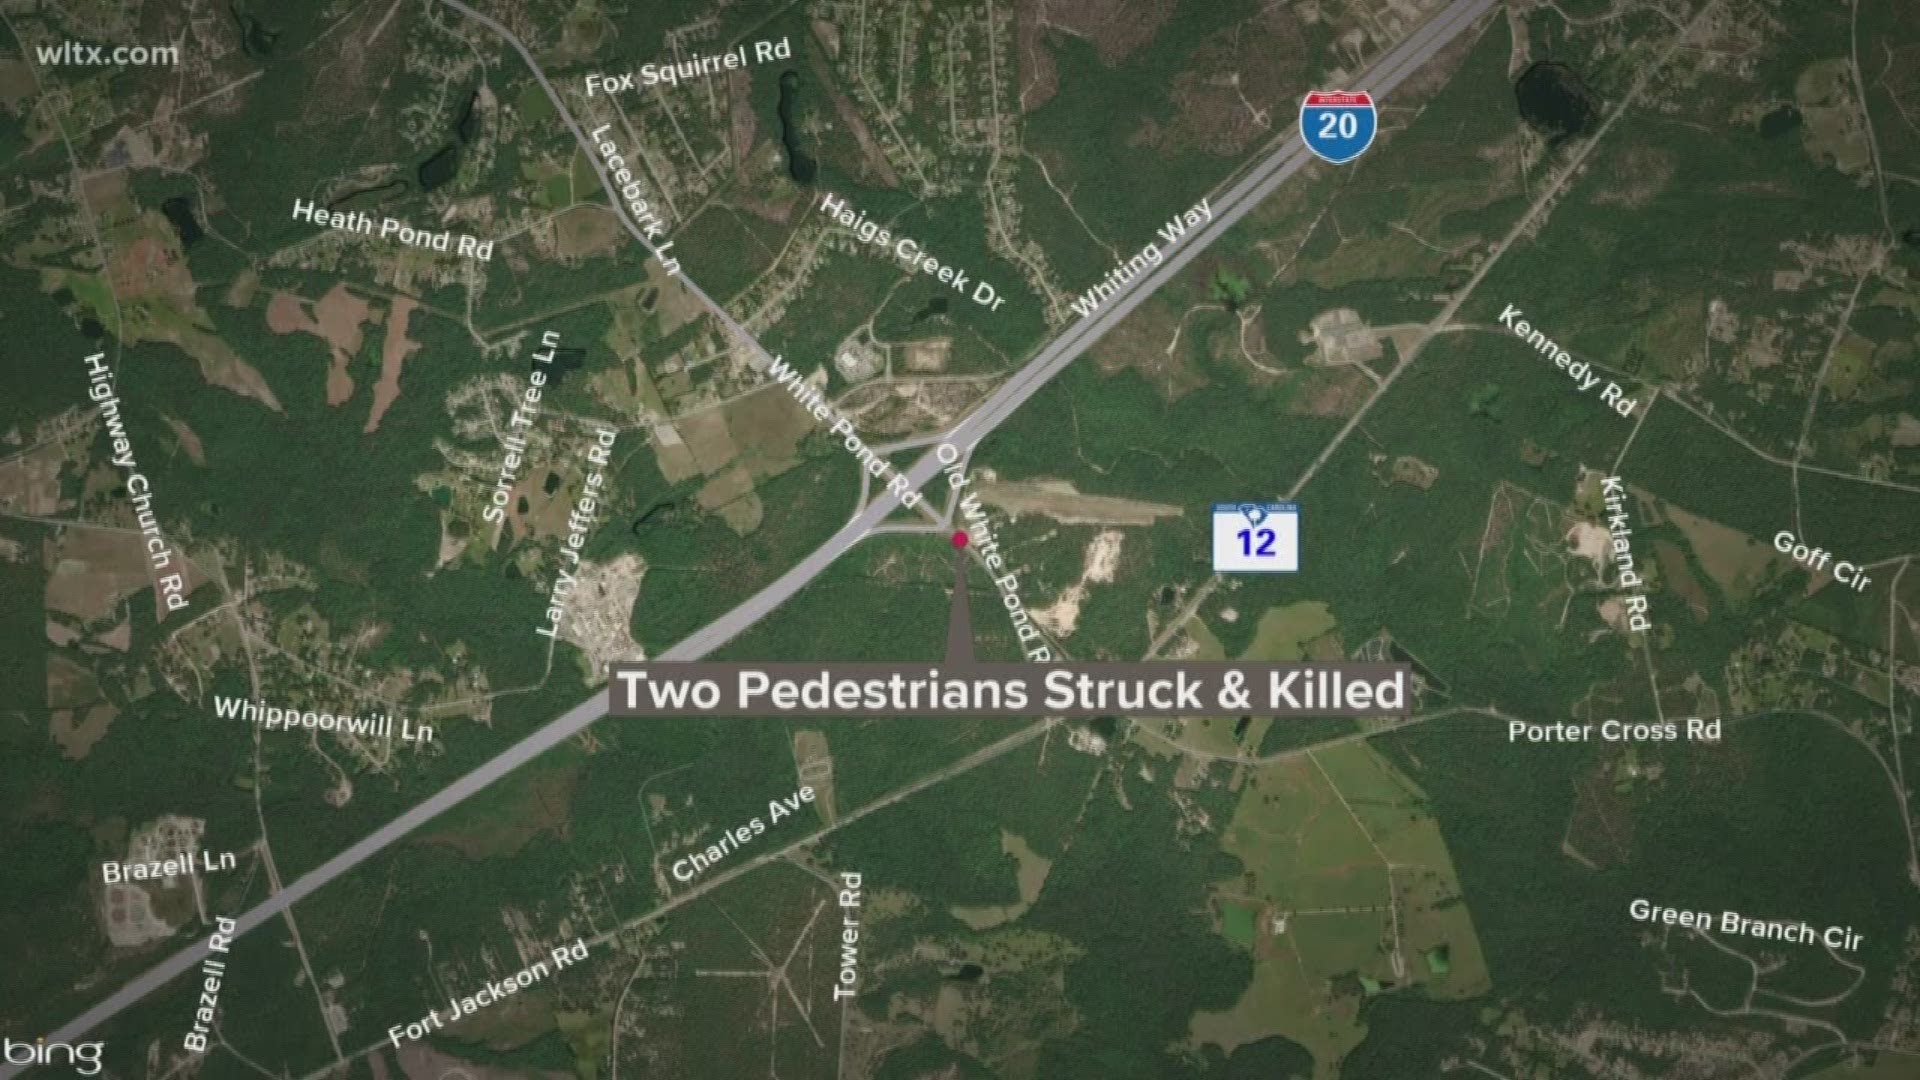 Two pedestrians were hit and killed by two cars early Friday morning on White Pond Road in Kershaw county.